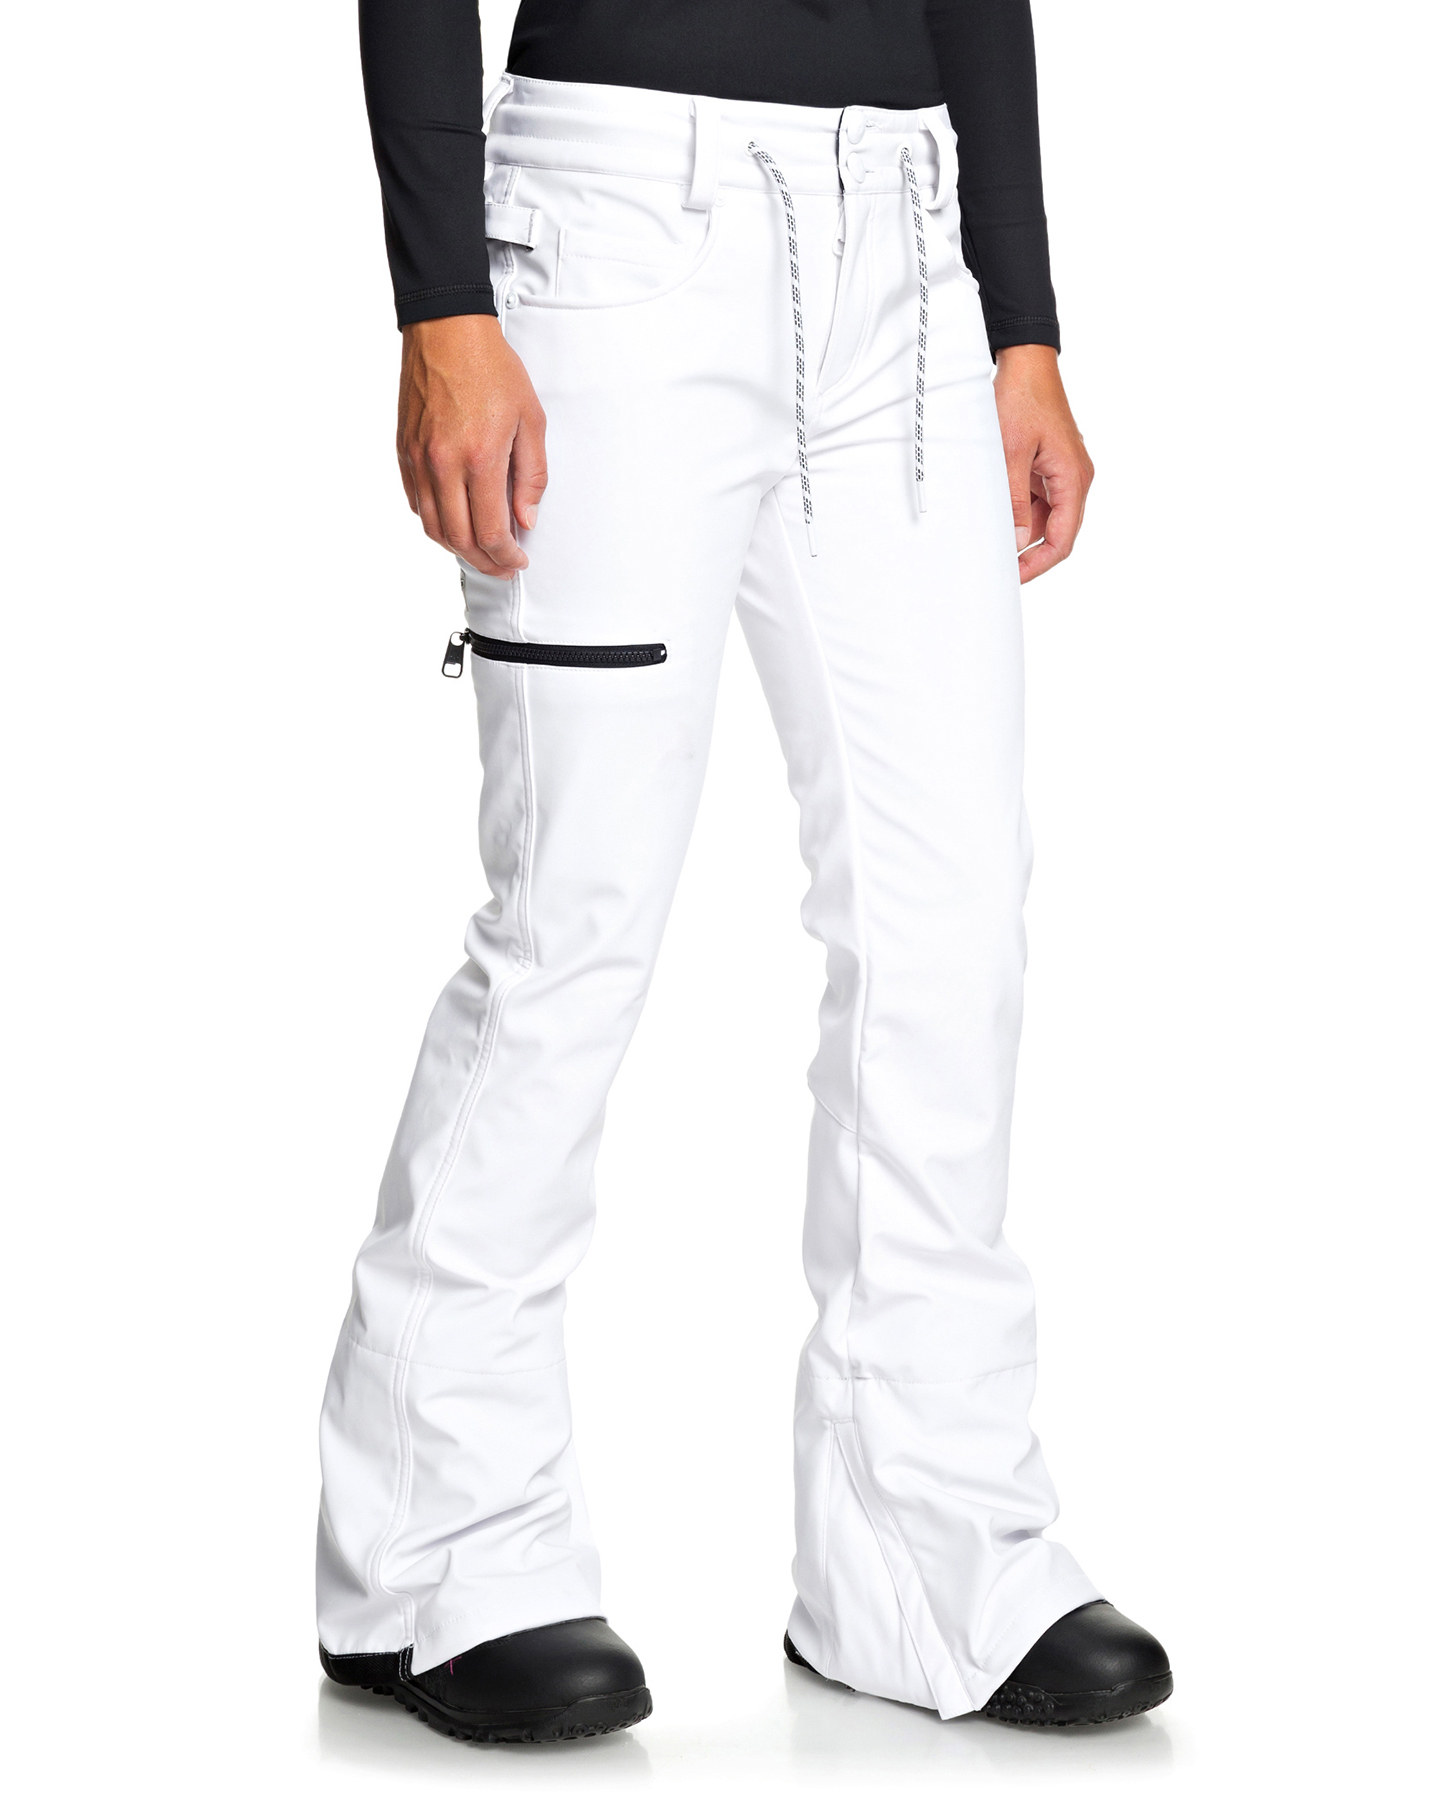 Dc Shoes Womens Viva Softshell Snow Pant - White | SurfStitch